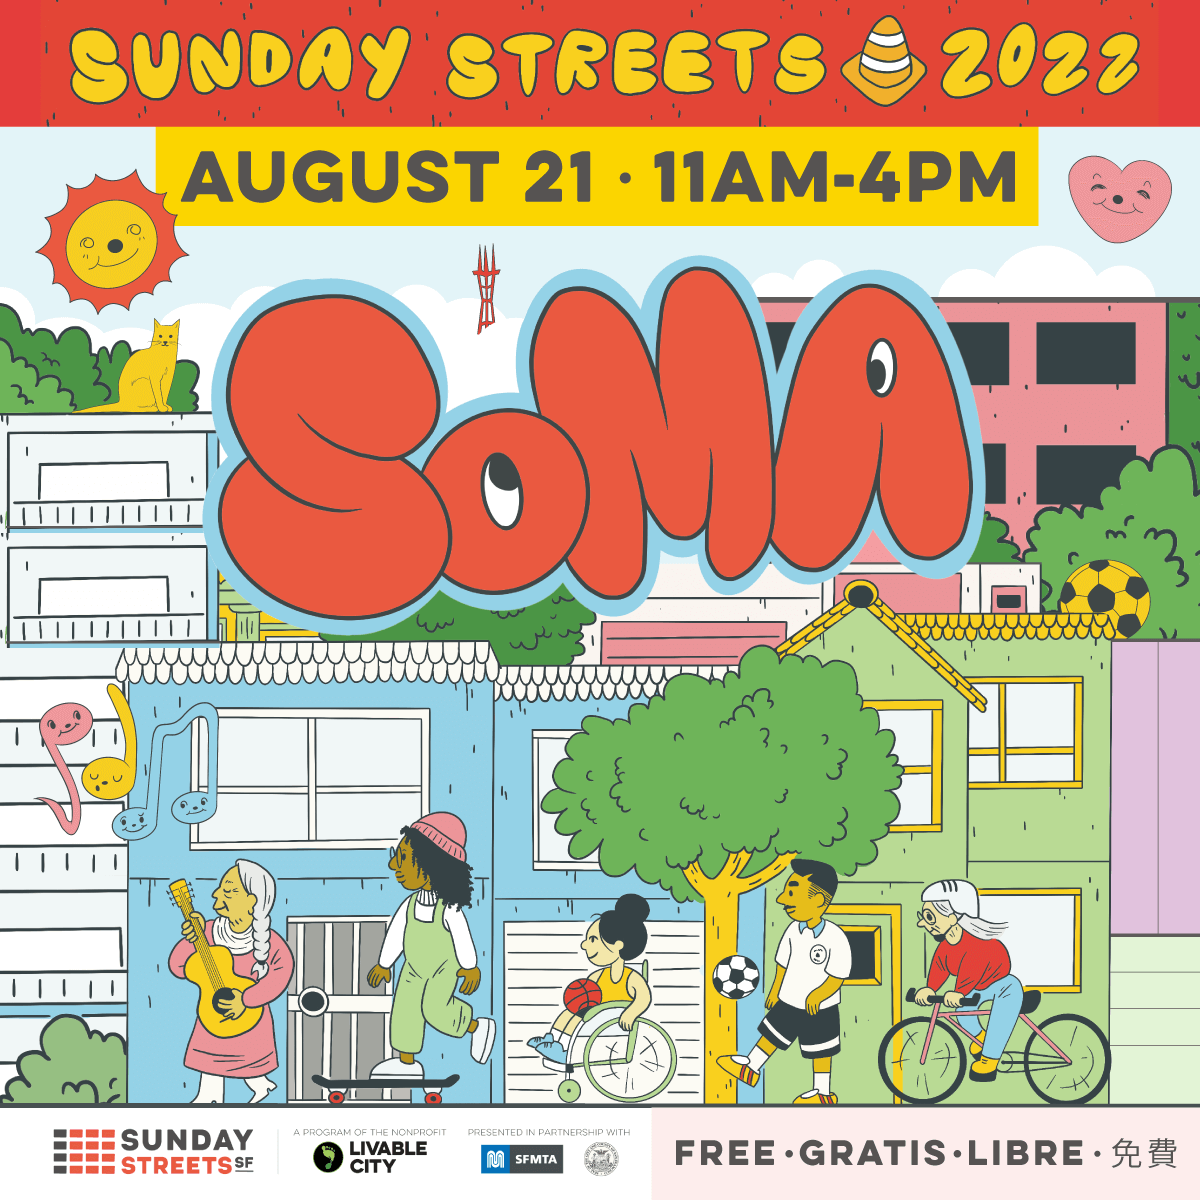 Sunday Streets is BACK: August 21st